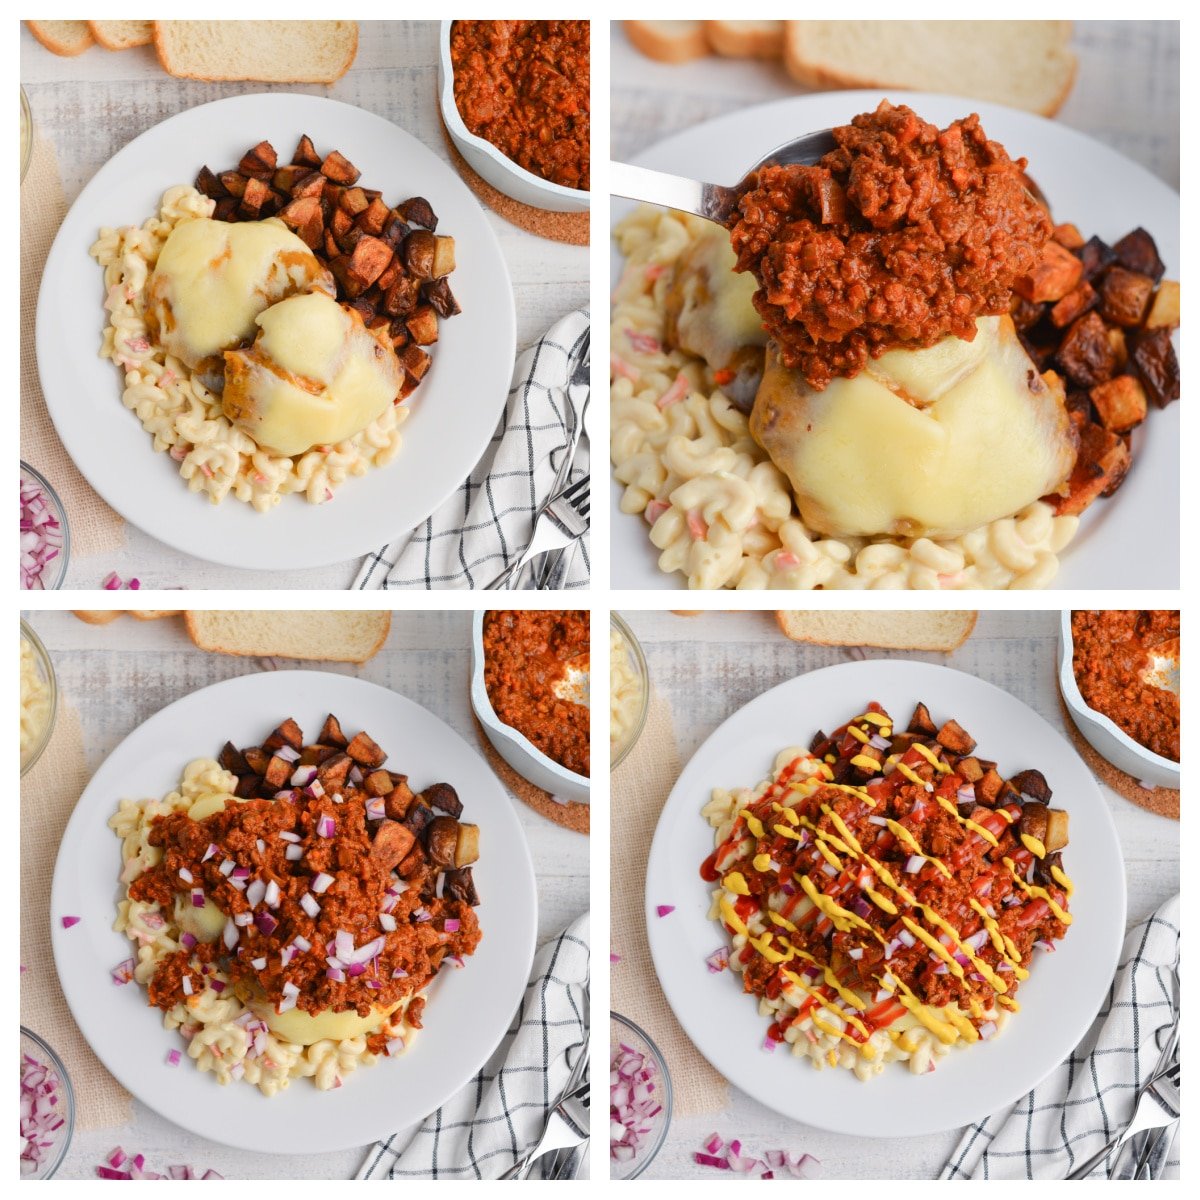 step by step images of how to make a garbage plate